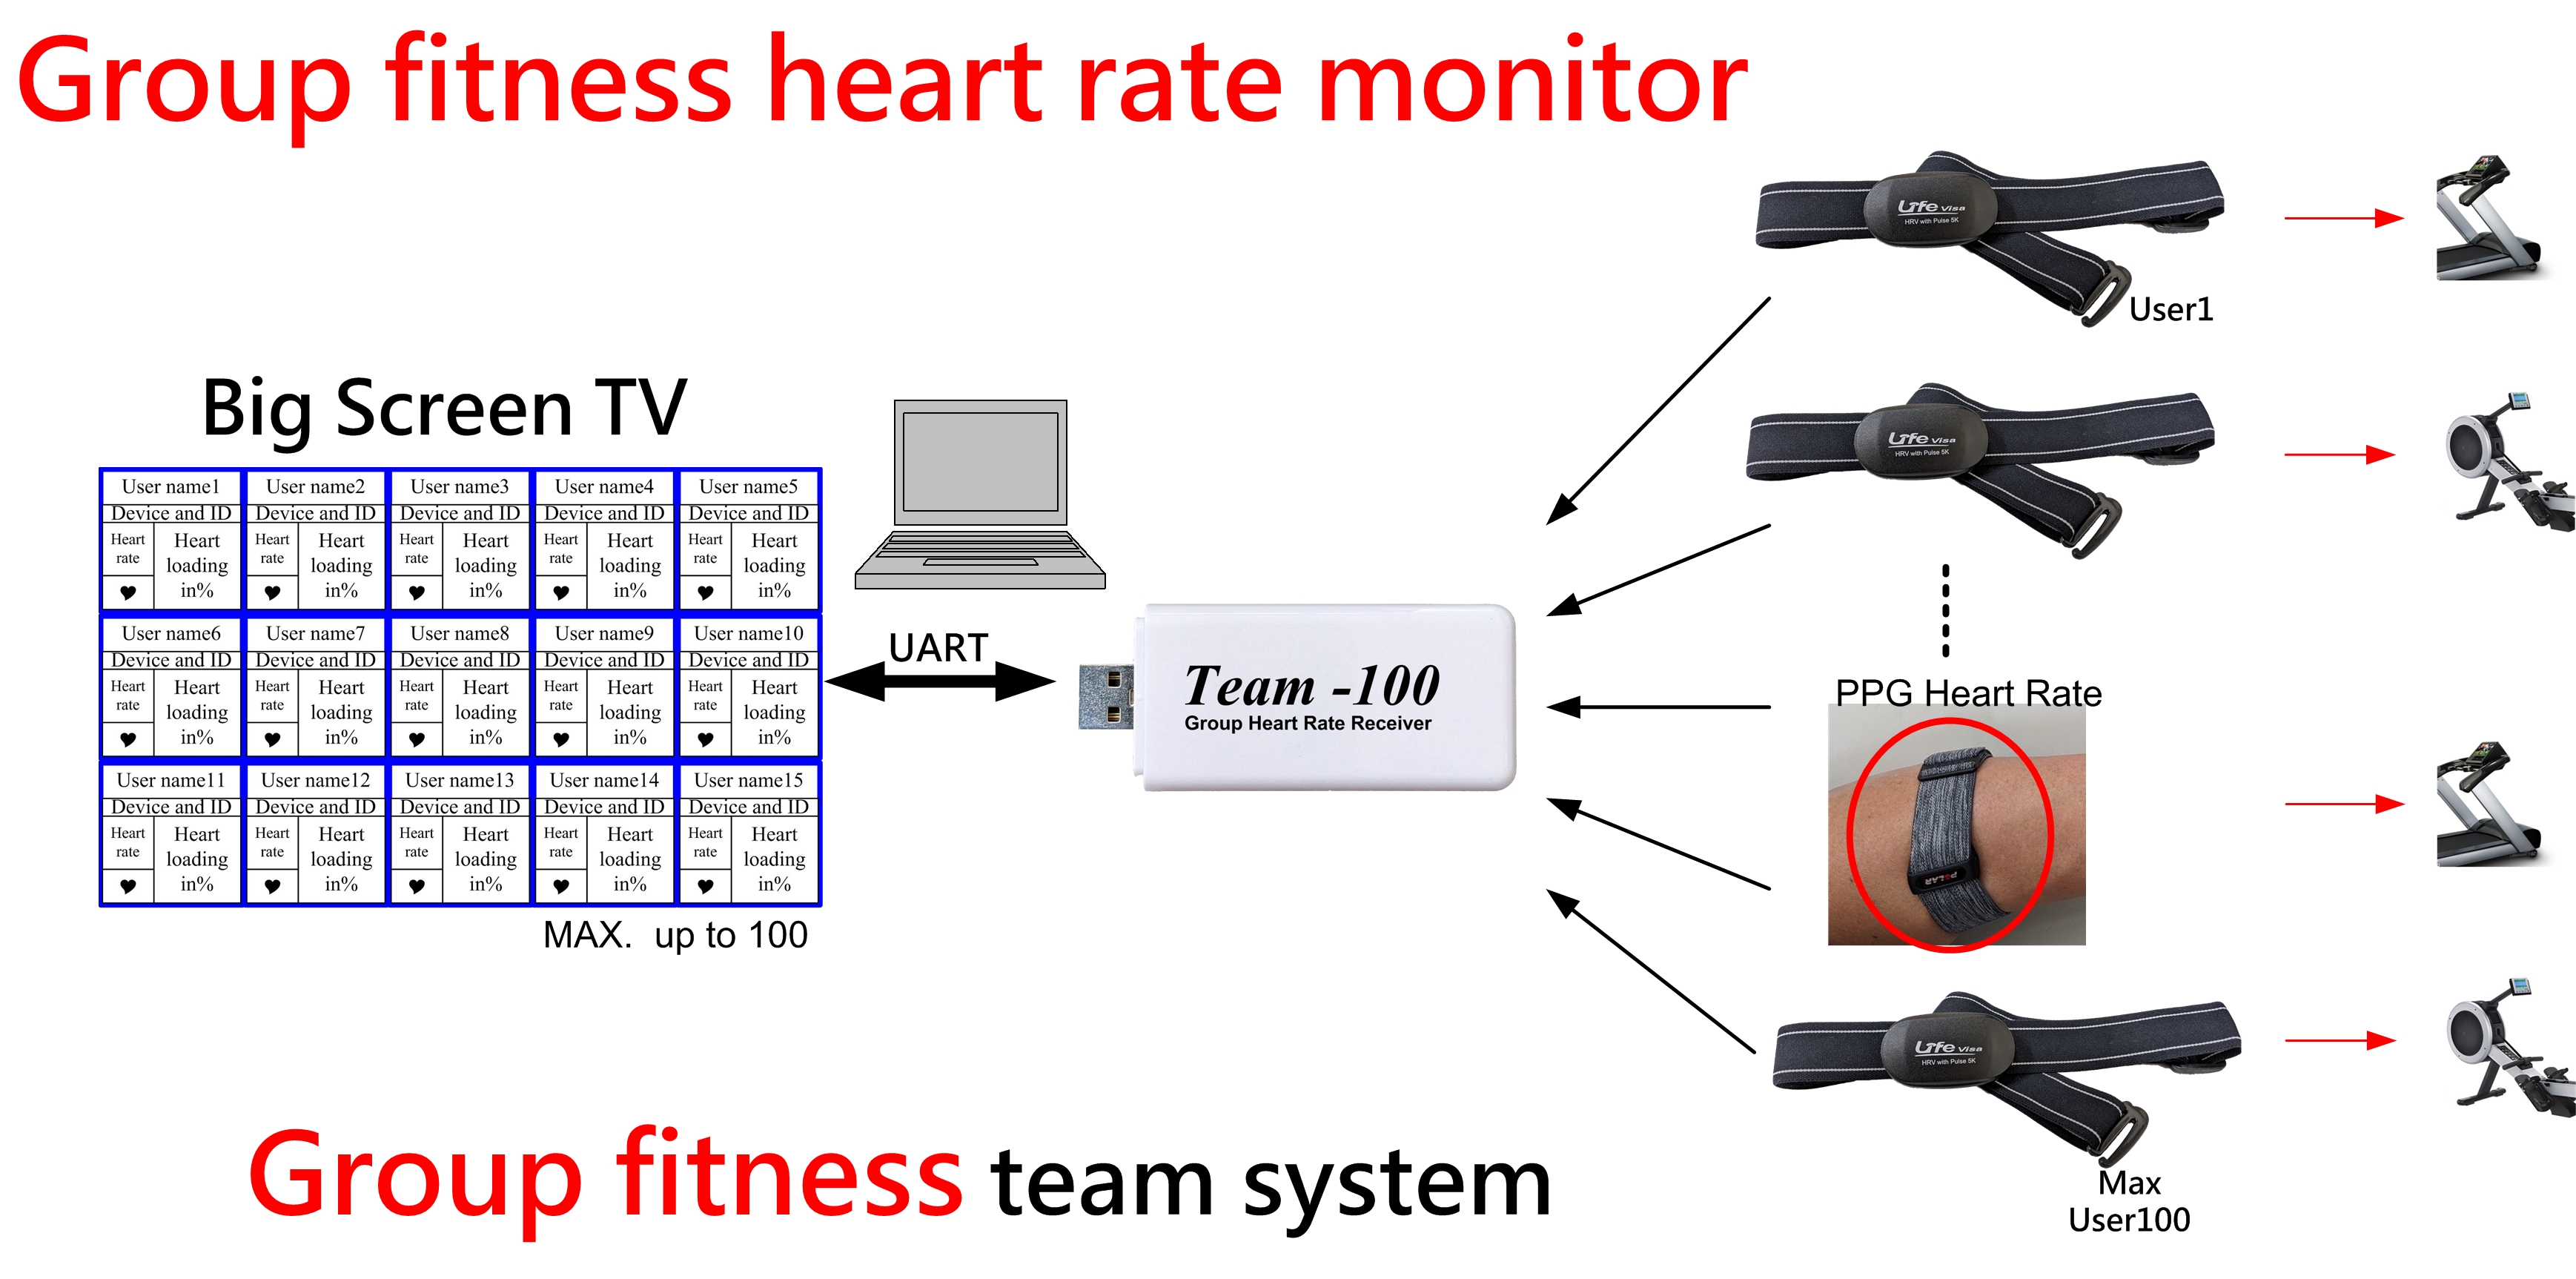 Group fitness heart rate monitor